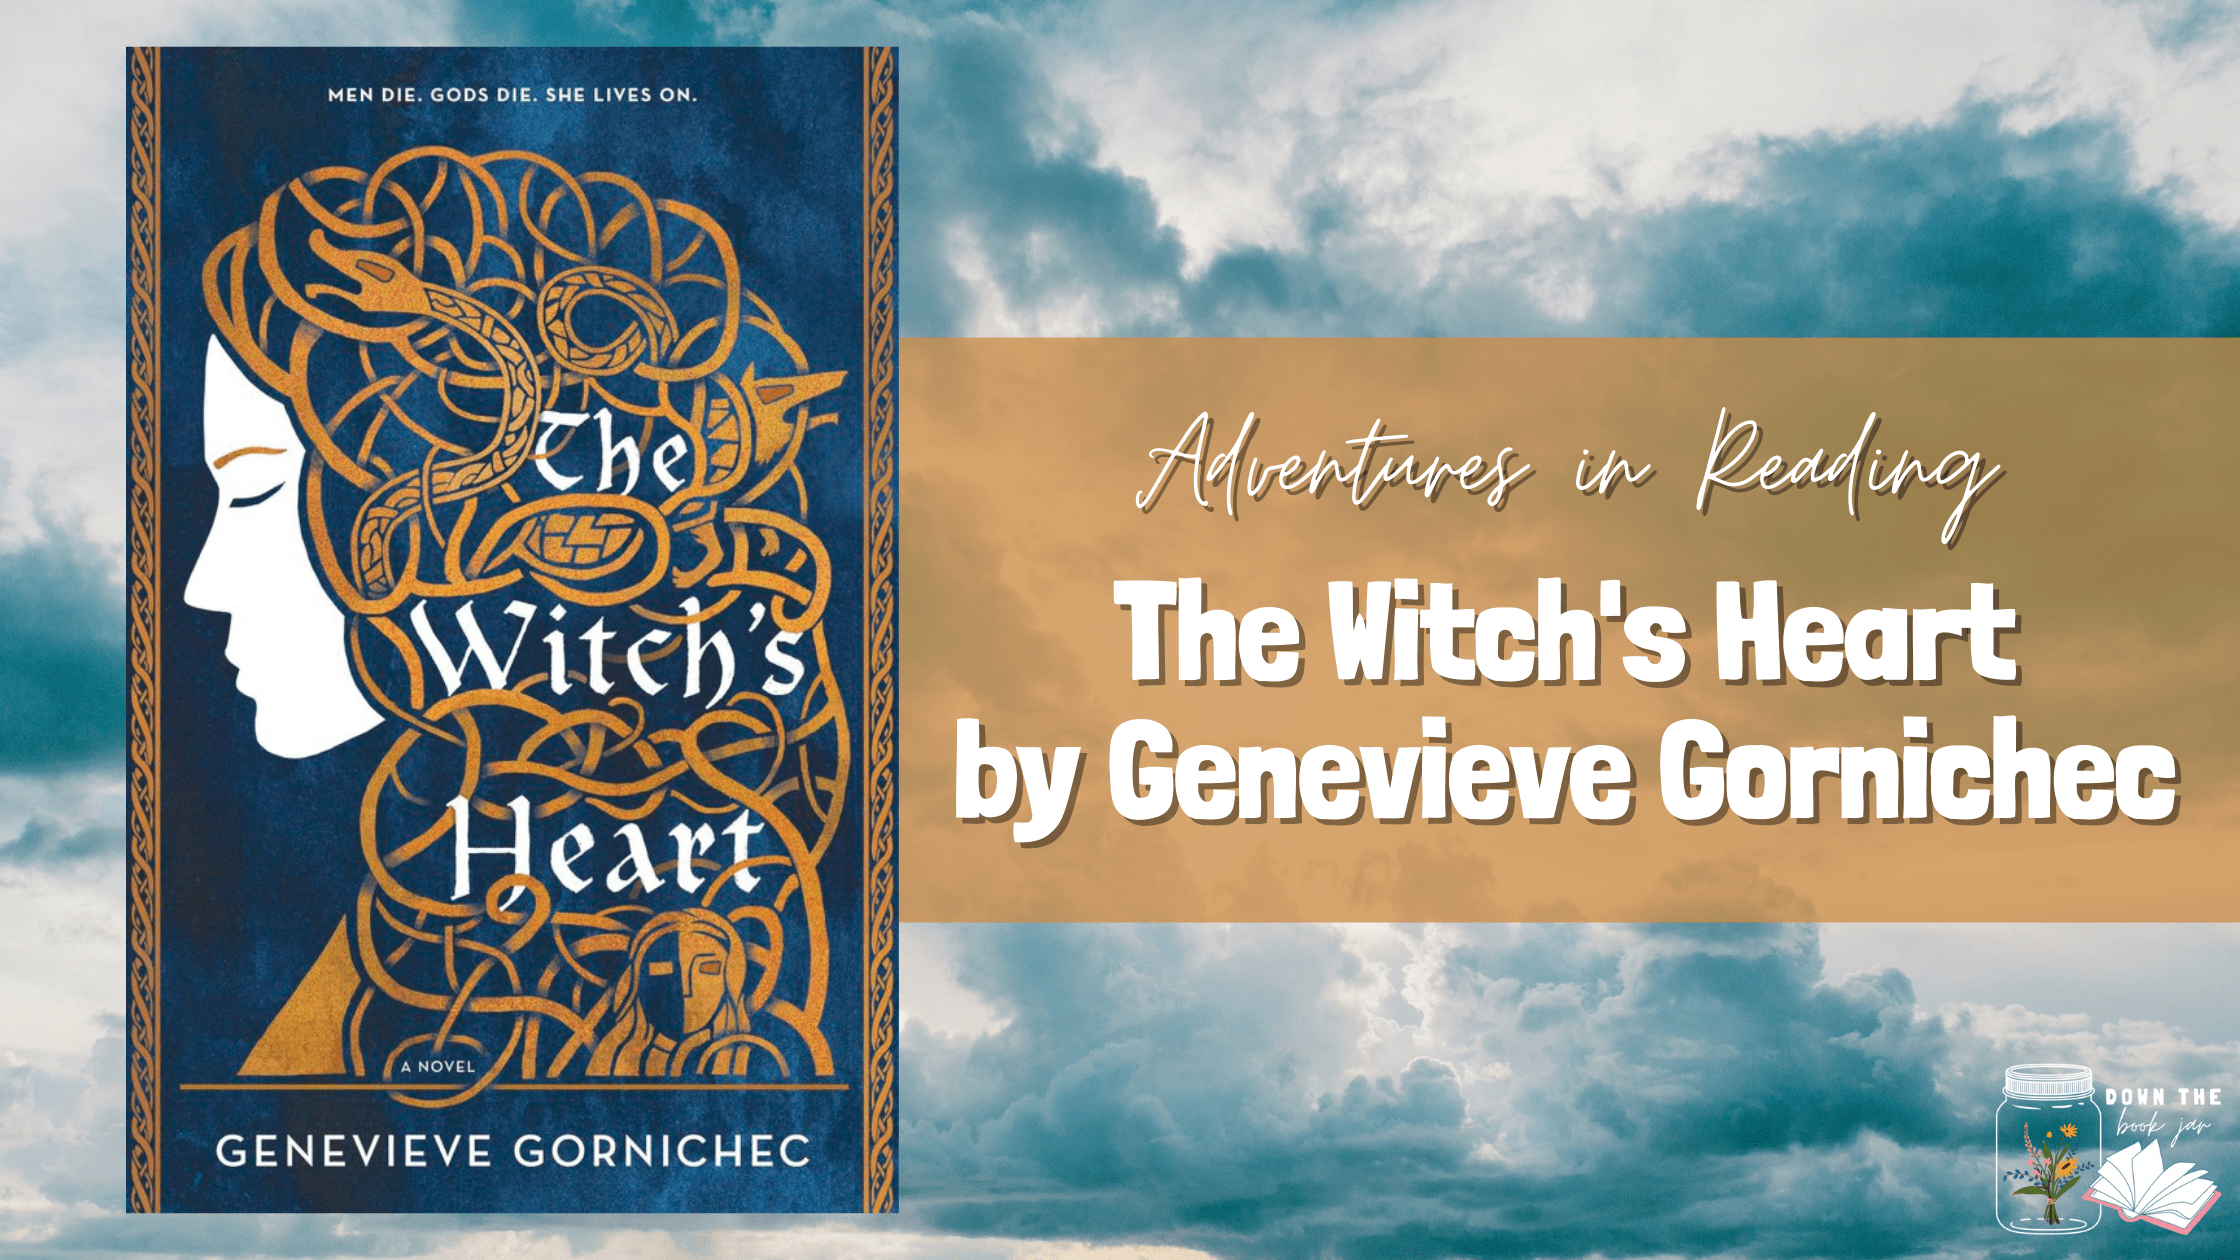 The Witch’s Heart by Genevieve Gornichec